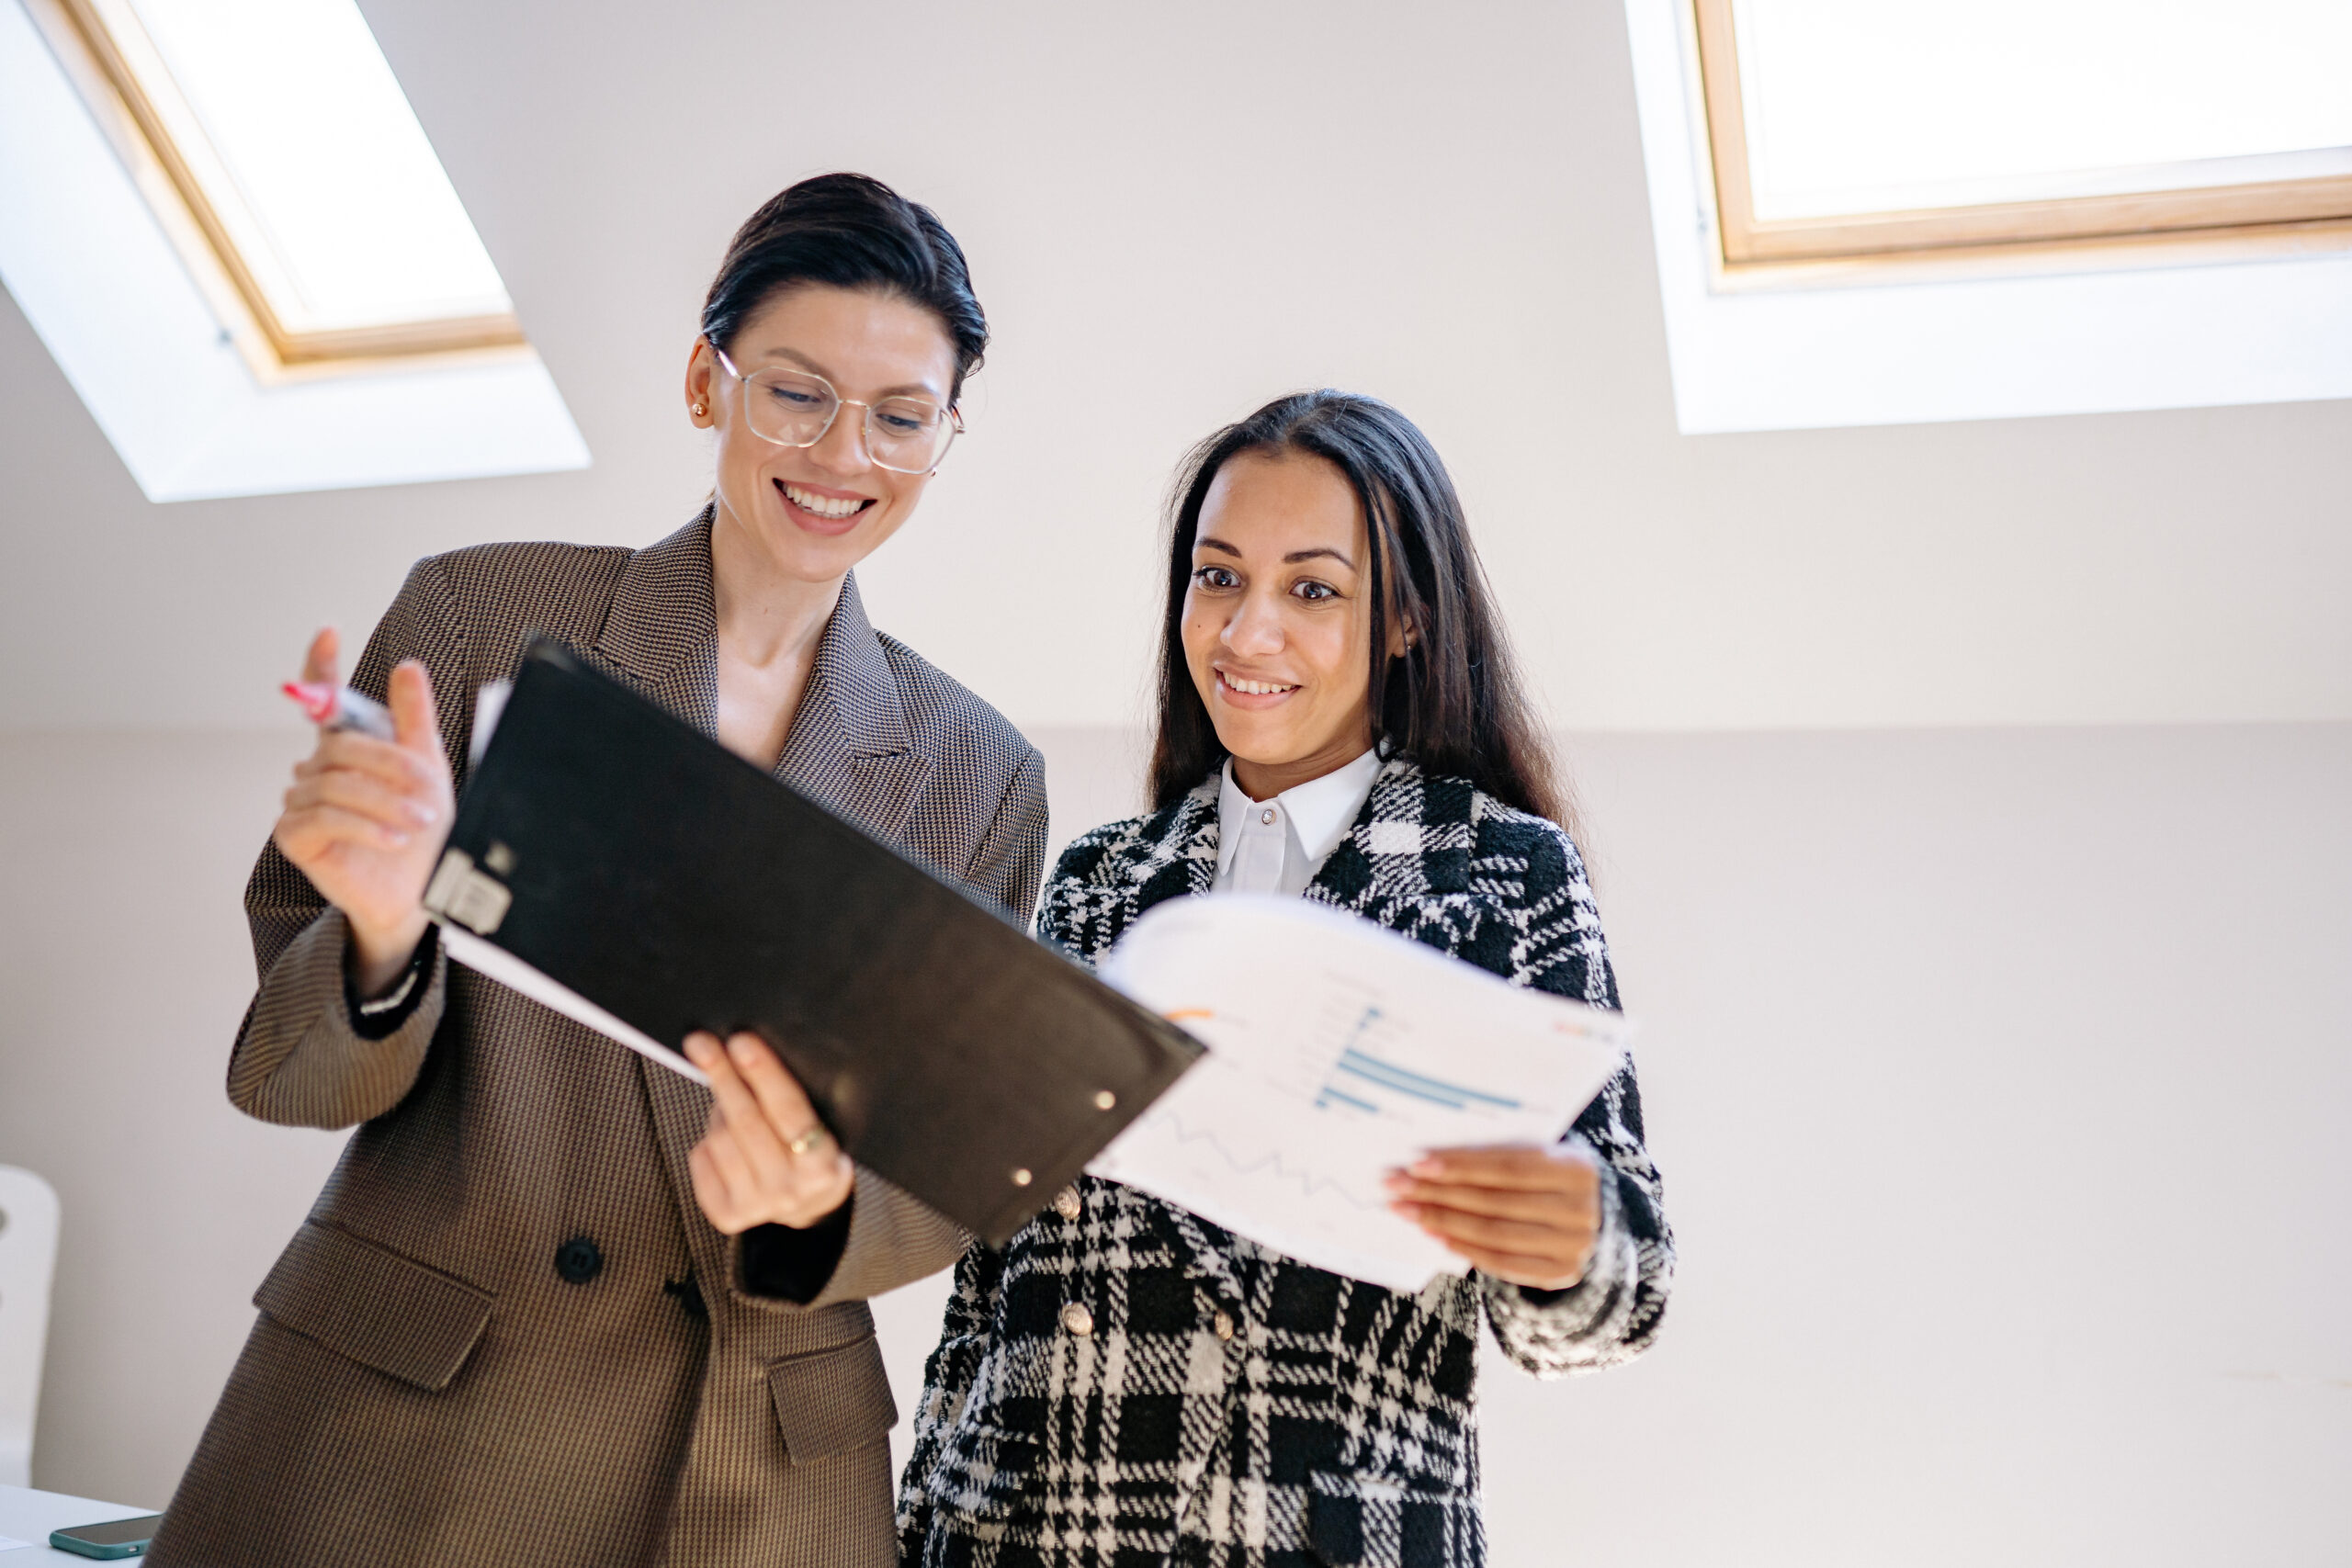 Happy women in corporate attire looking at a document